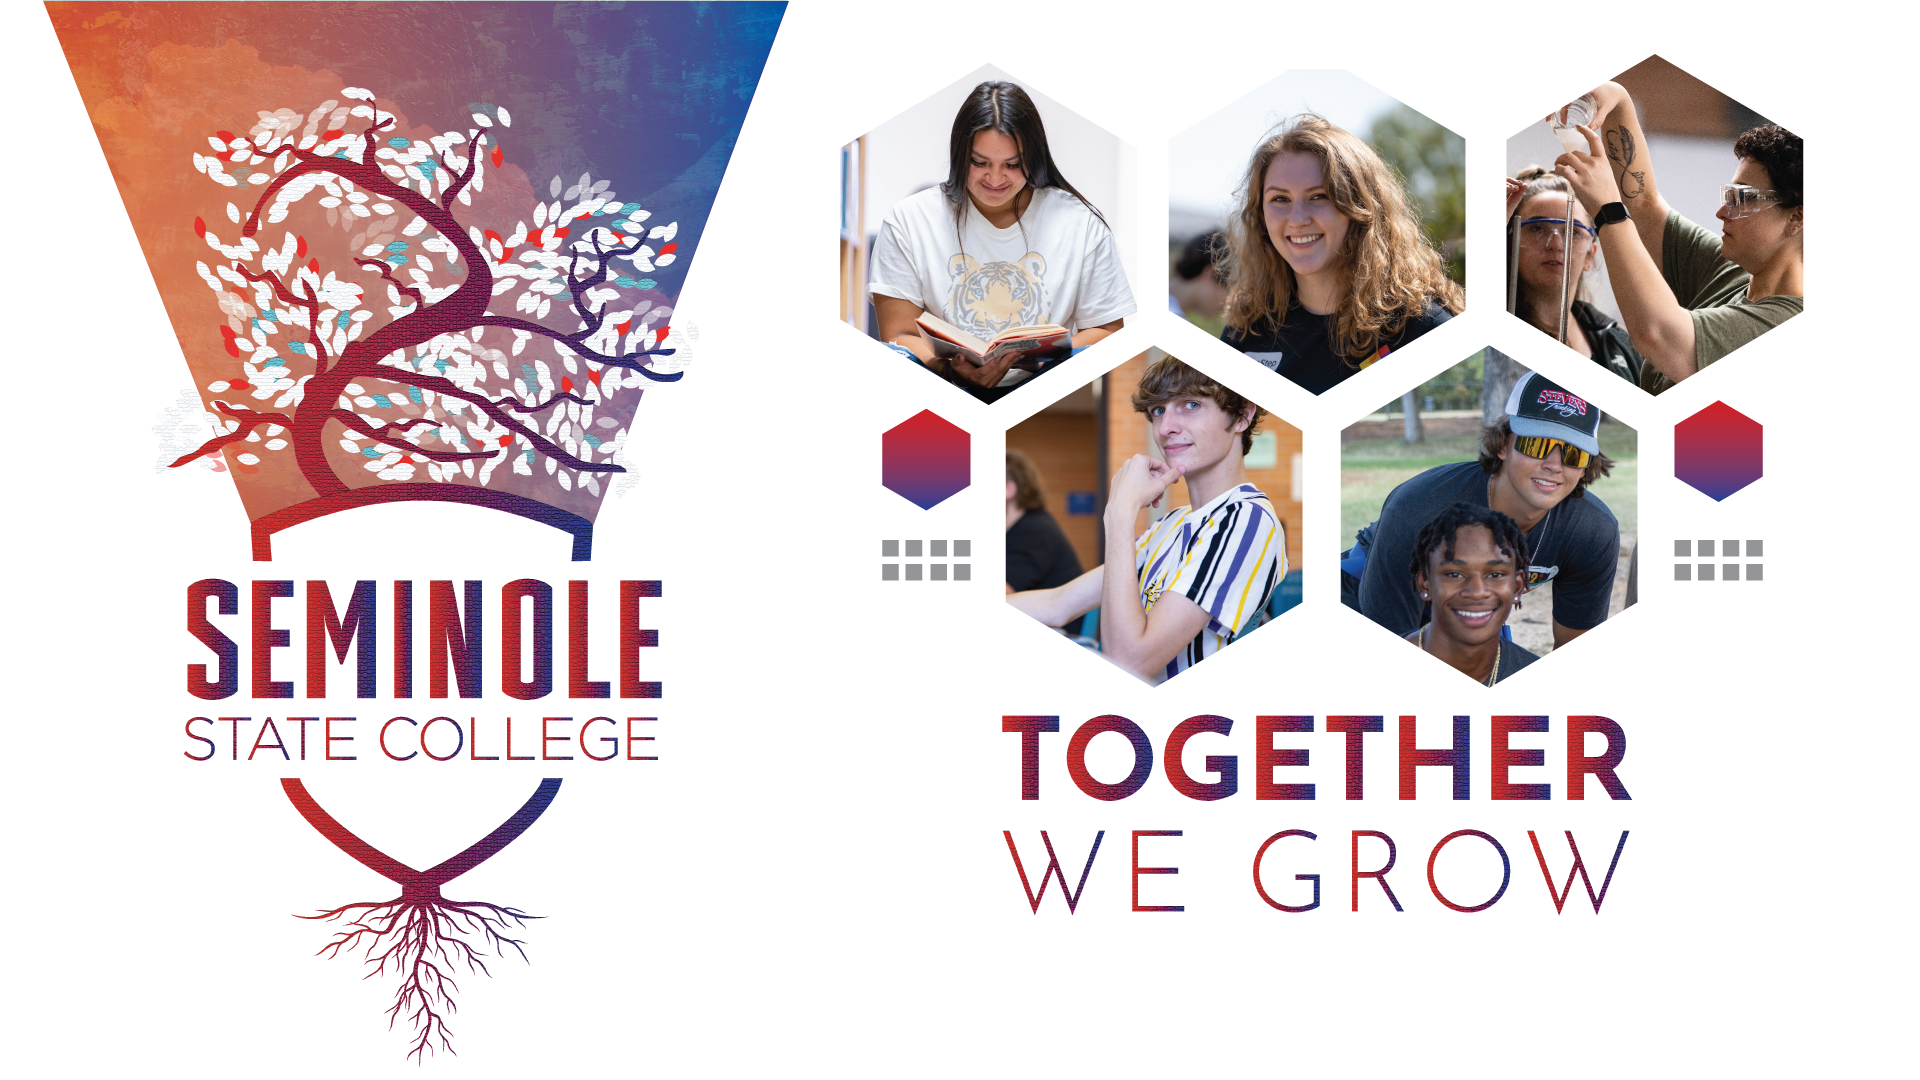 SSC logo with "Together We Grow" tagline